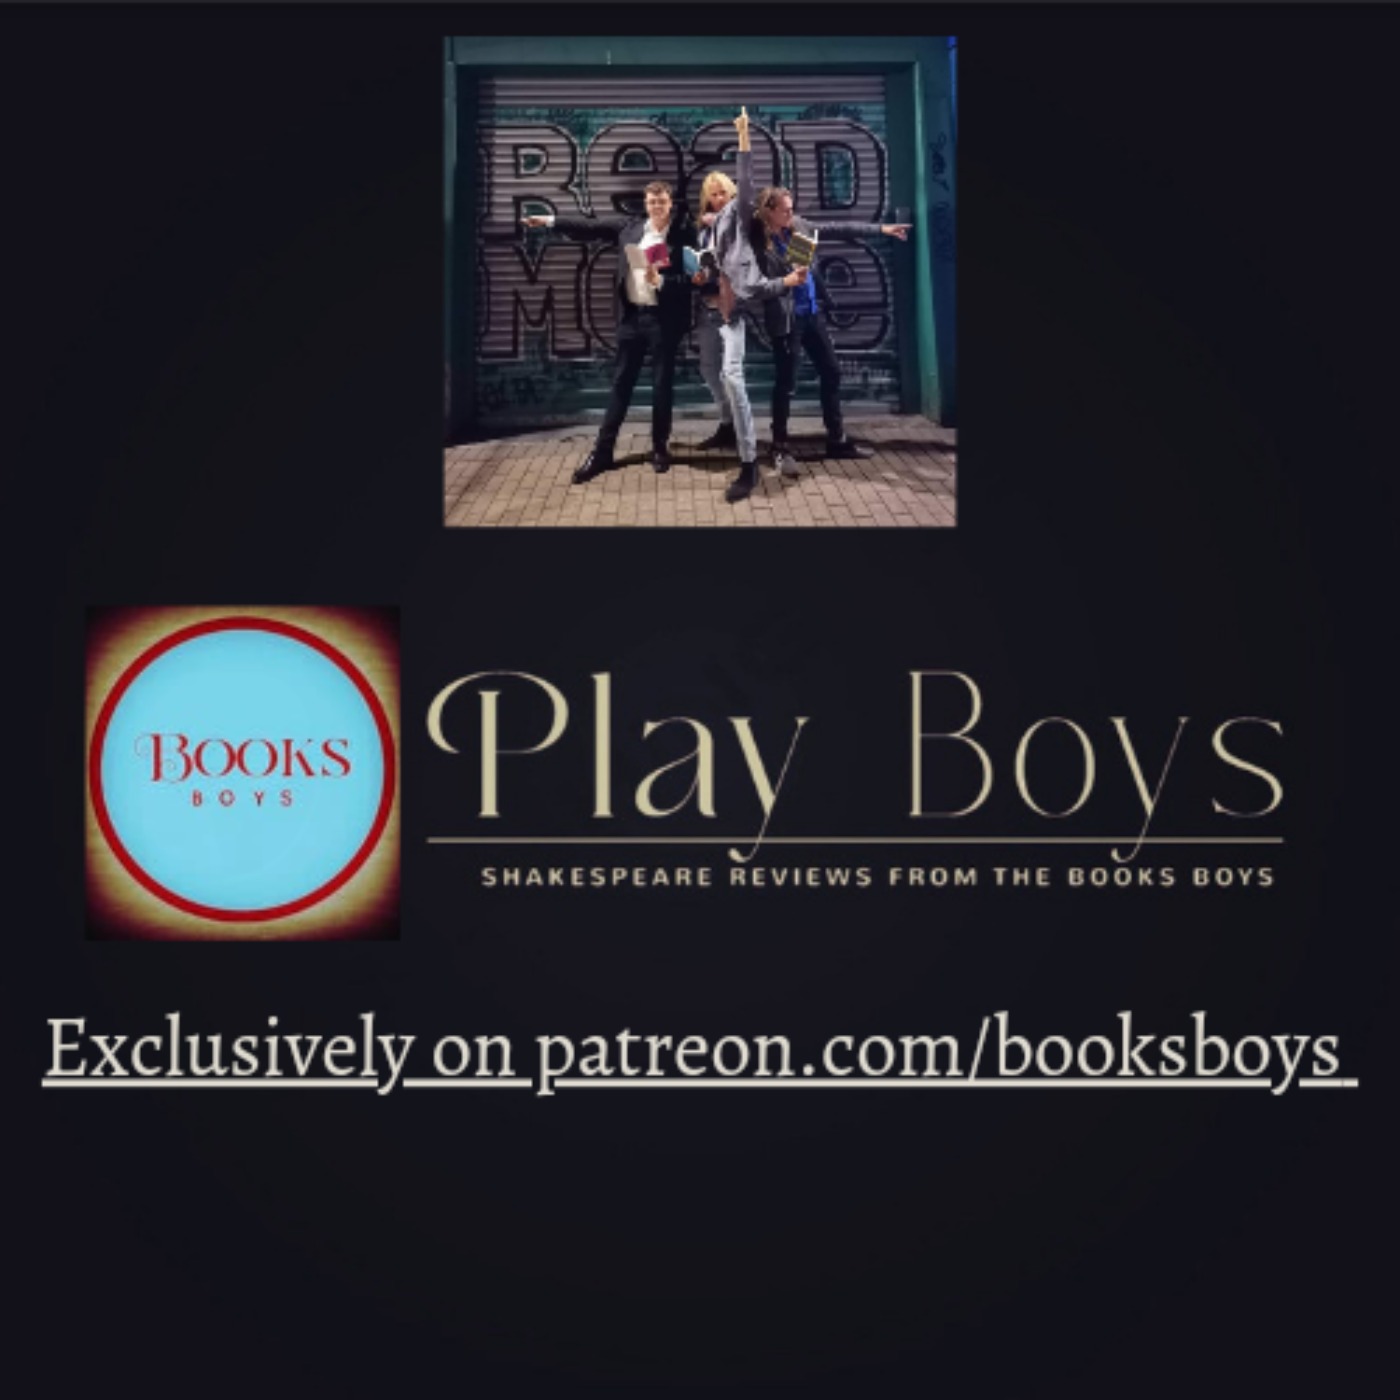 Playboys Episode 10: Taming Of The Shrew